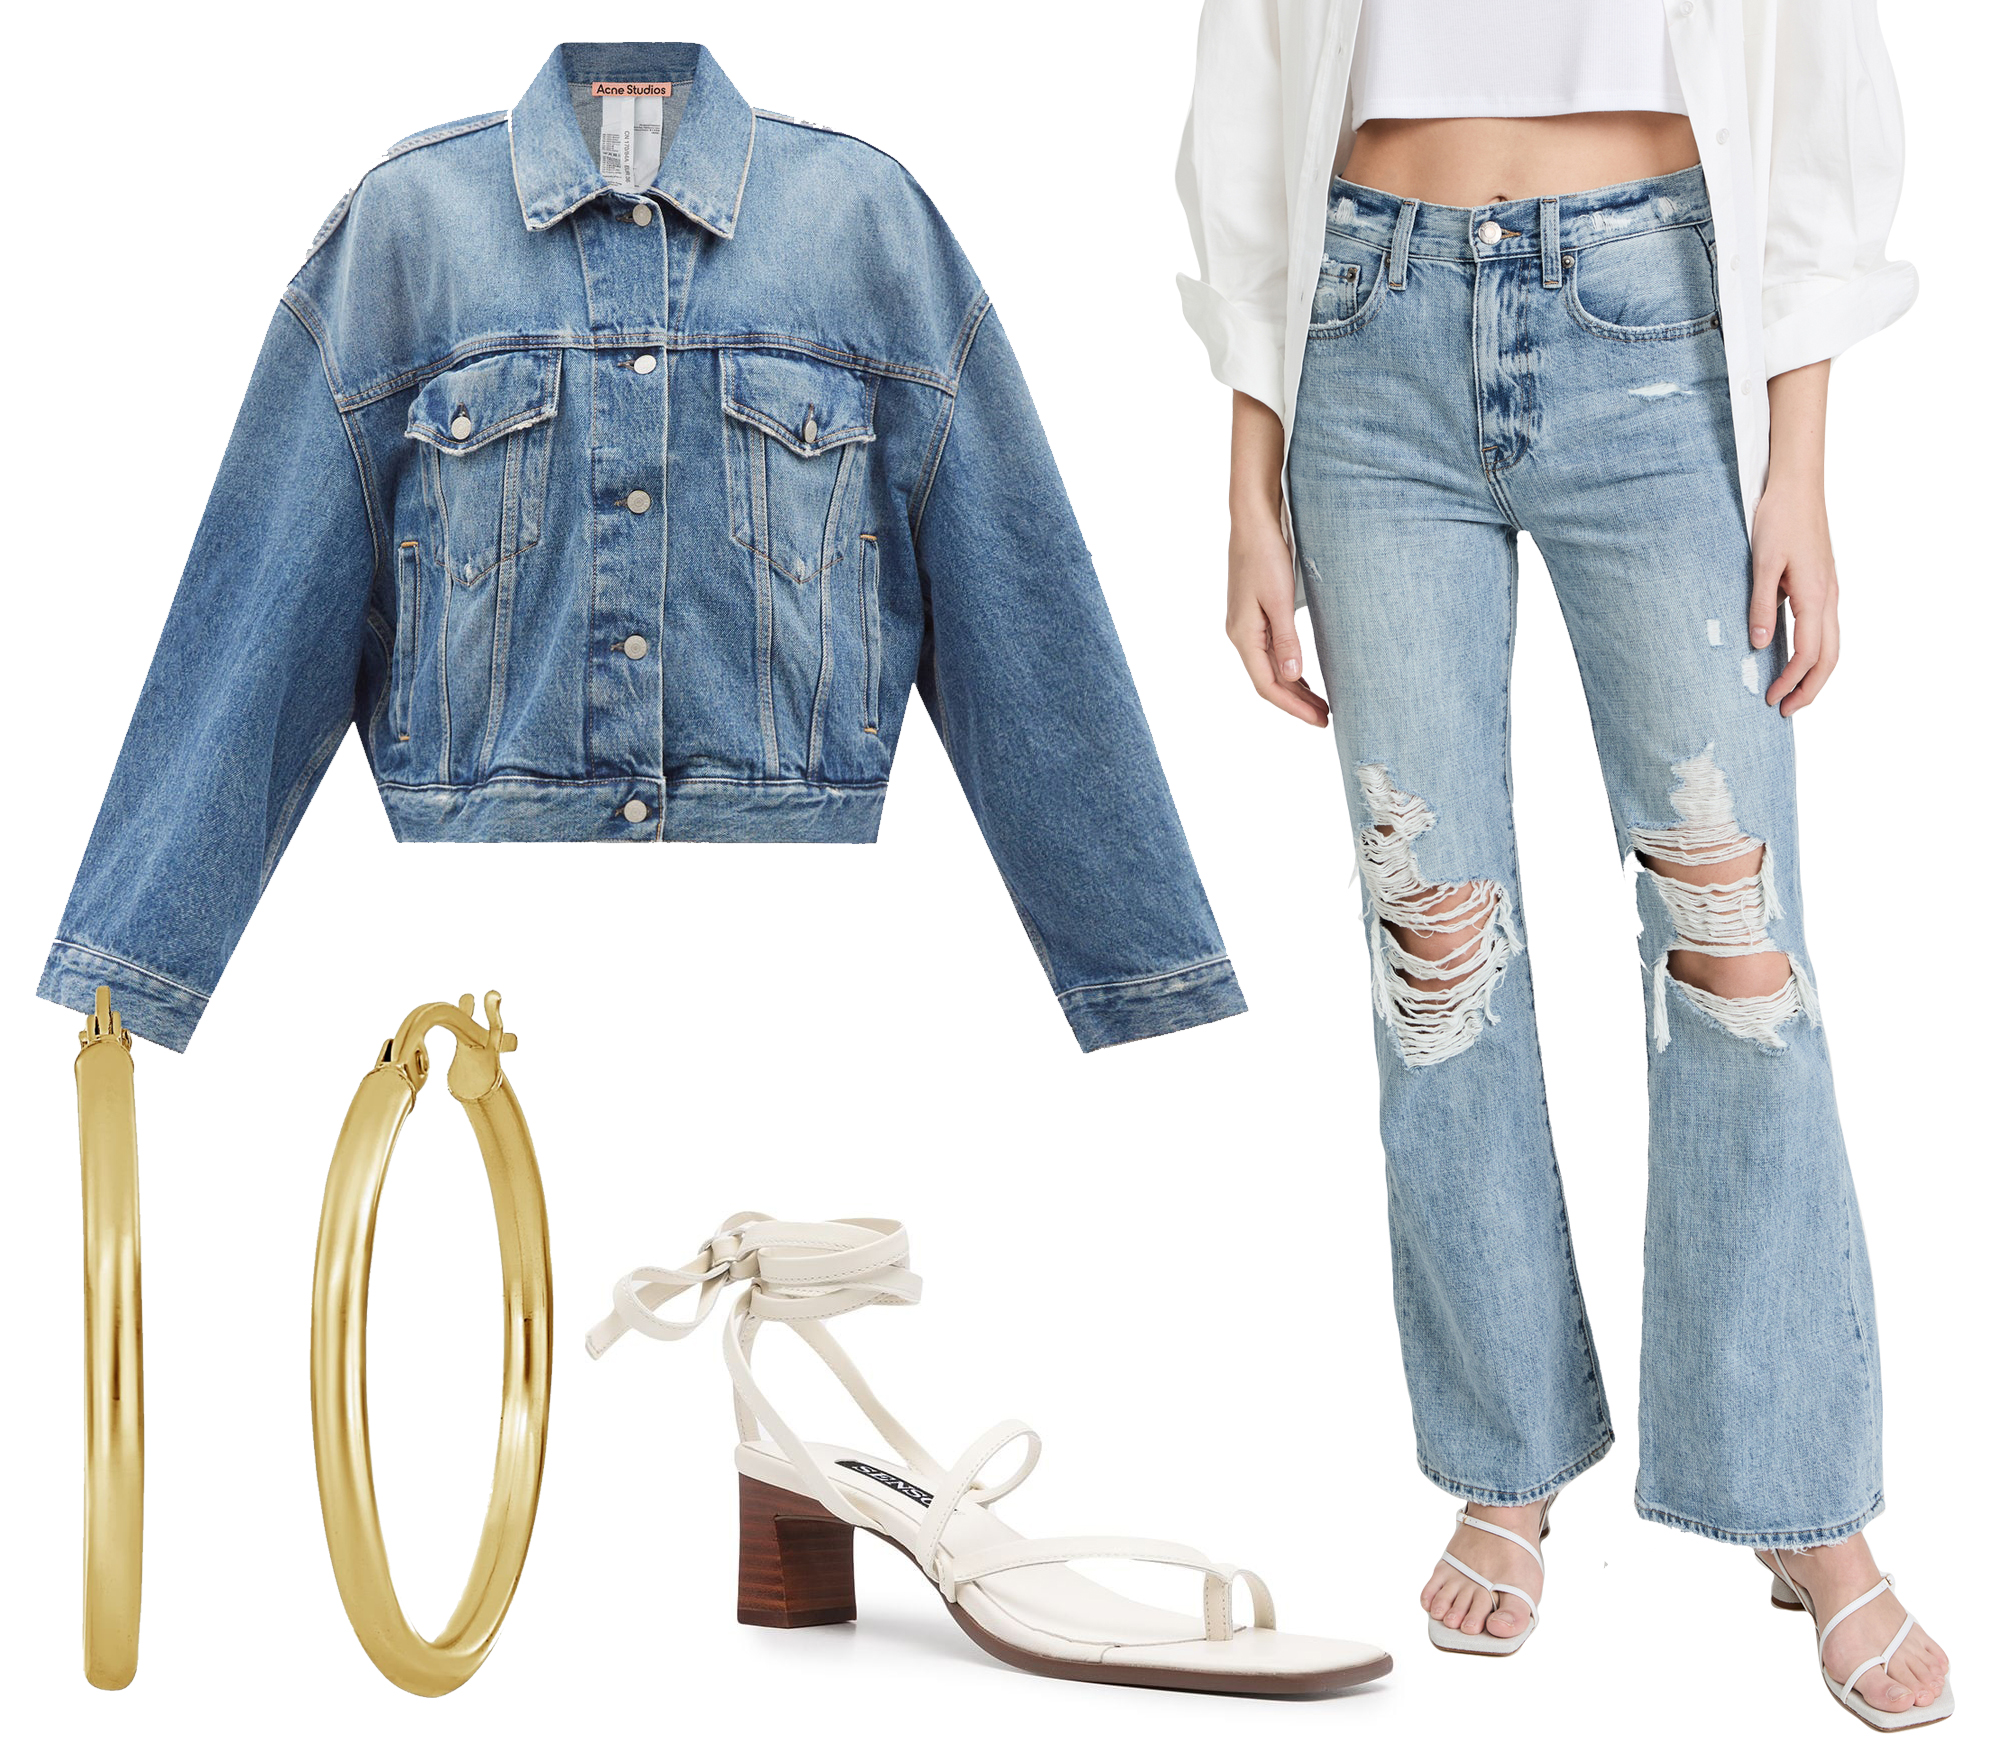 Elevated Elegance: This ensemble featuring Acne Studios' Morris Oversized Cropped Denim Jacket and Pistola Denim's Stevie High Rise Flare Jeans, accessorized with Bony Levy gold hoop earrings and Senso's Raegan lace-up sandals, embodies the upscale potential of denim-on-denim fashion